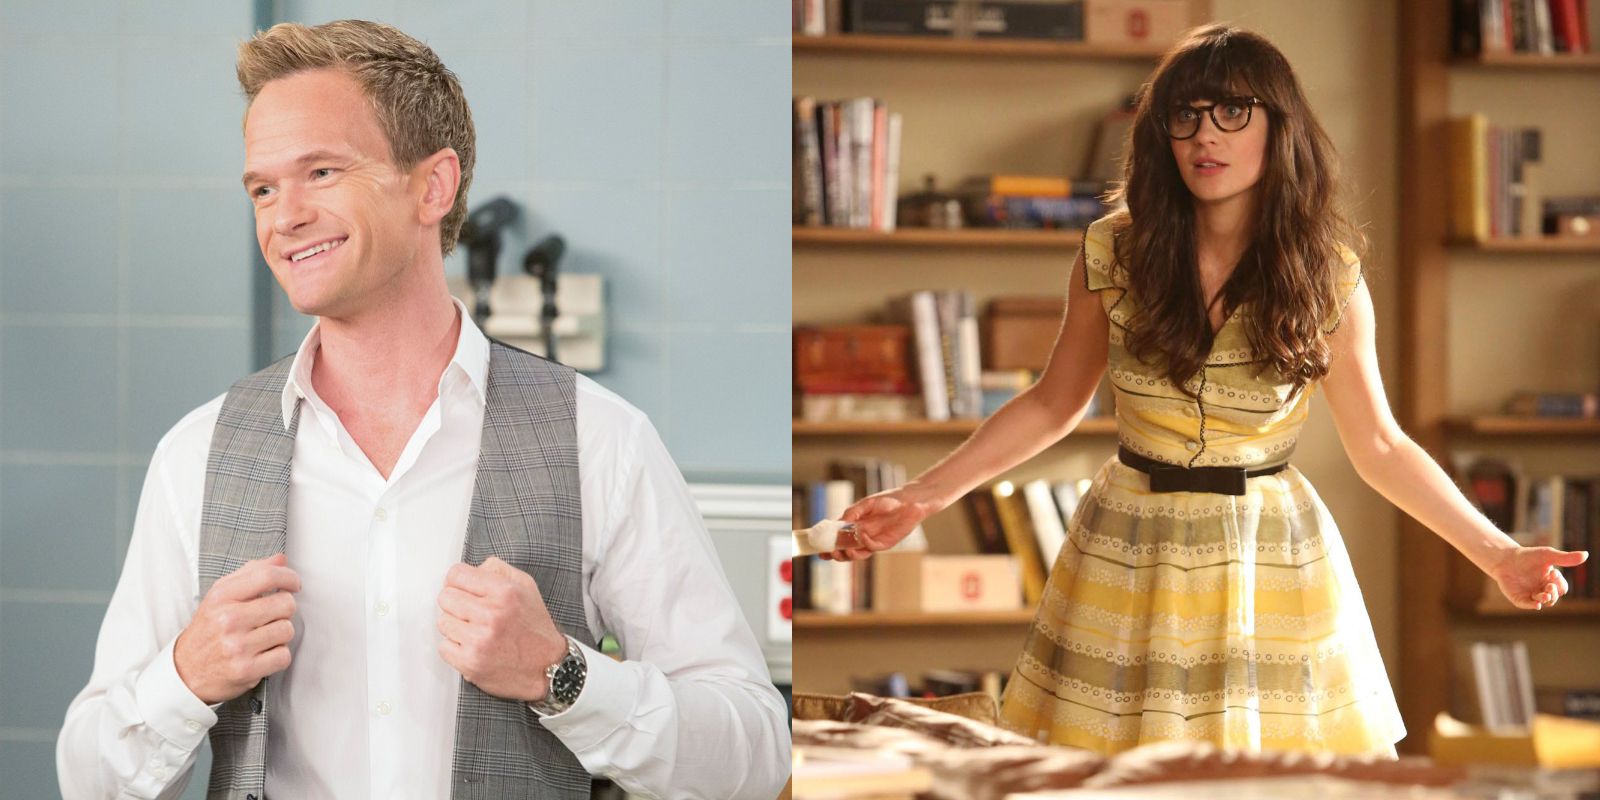 Barney in How I Met Your Mother and Jess in New Girl.